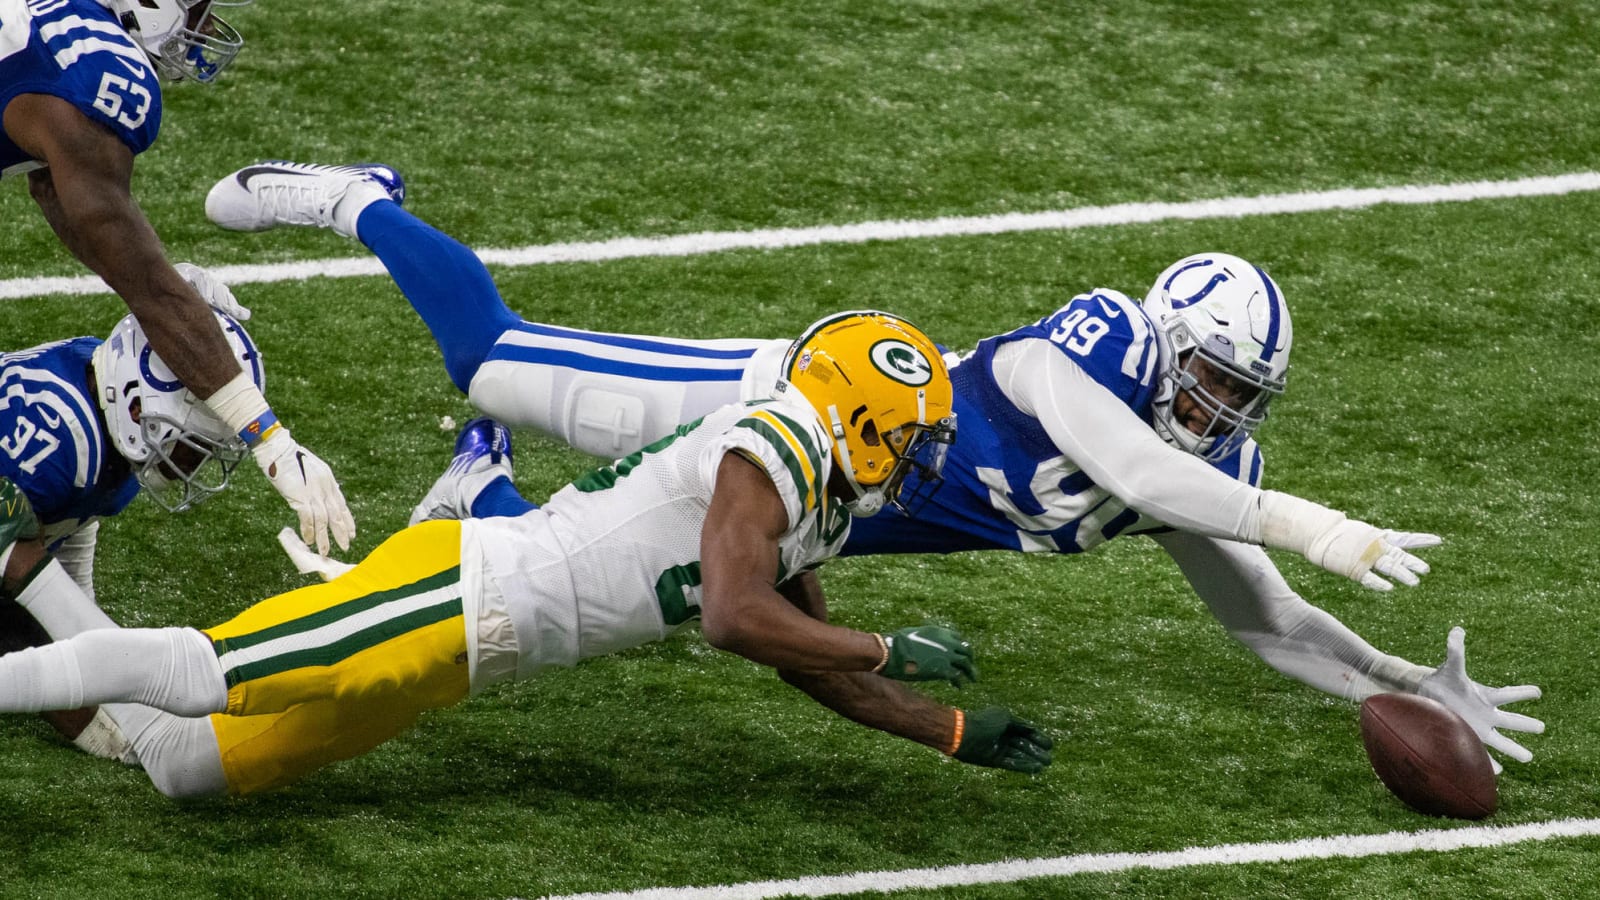 Marquez Valdes-Scantling says he received death threats over fumble